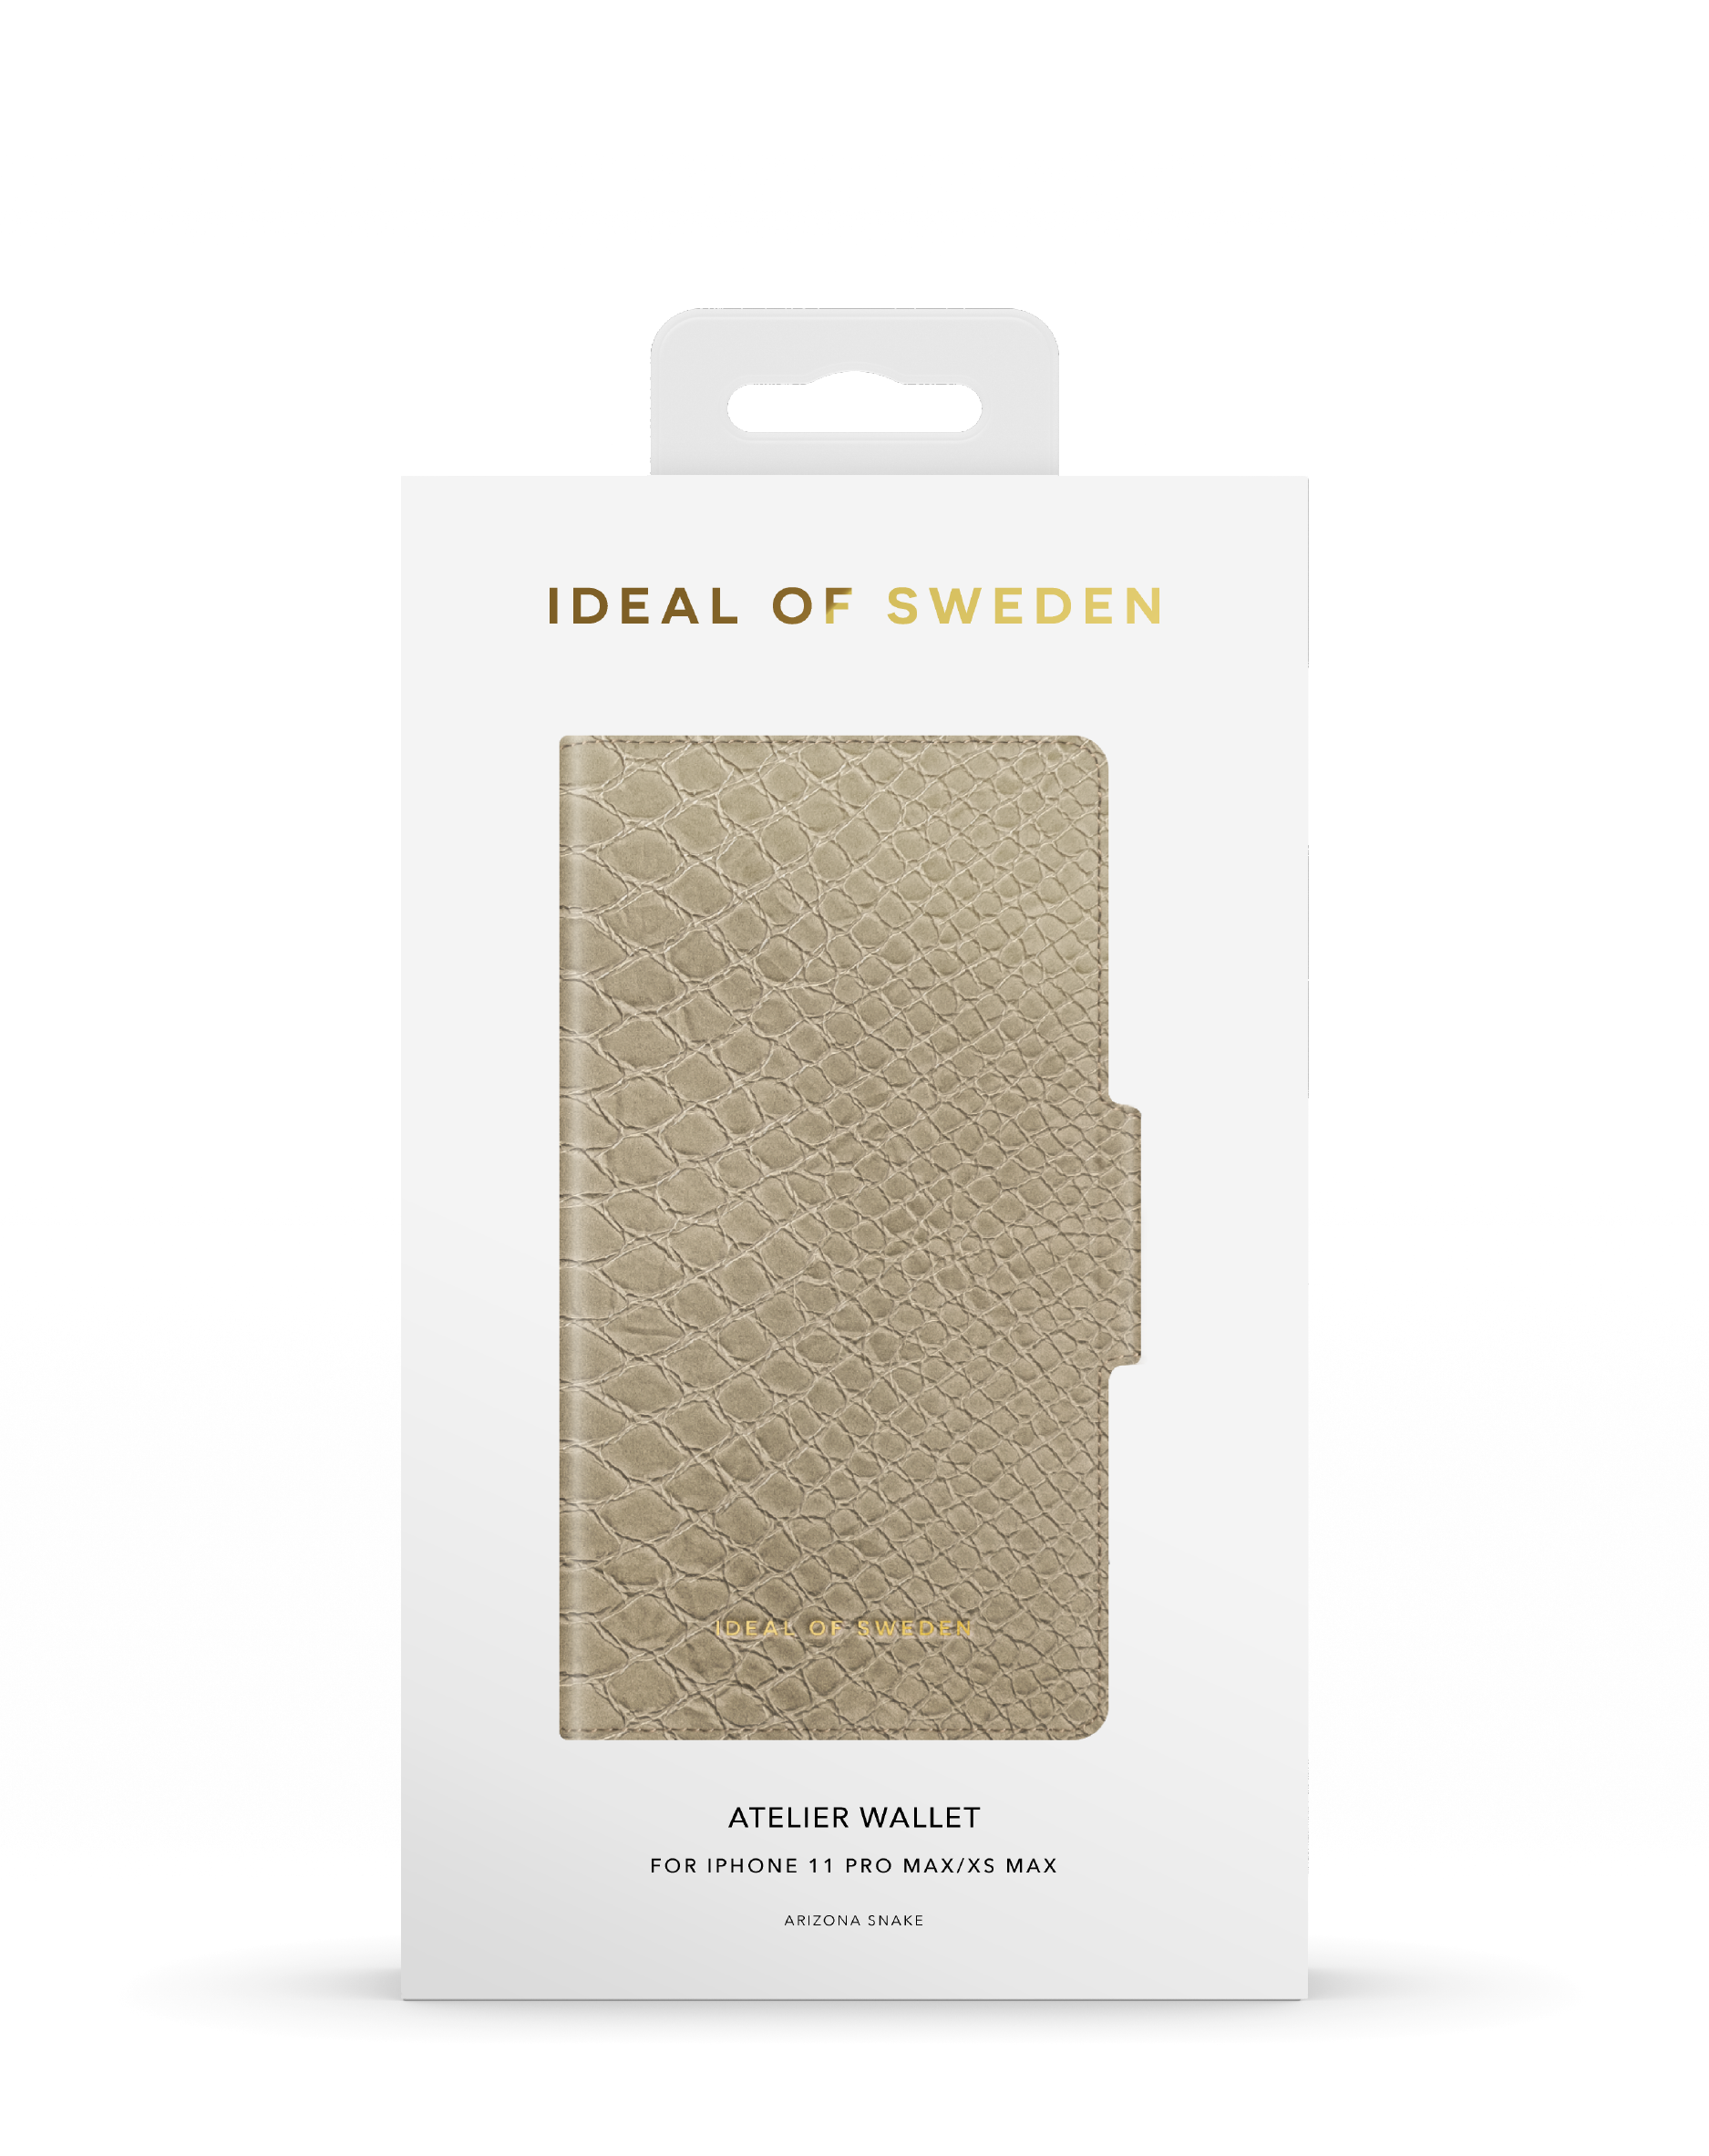 IDEAL OF SWEDEN IDAW-I1965-225, iPhone Apple, Arizona Max, 11 Apple iPhone Pro XS Max, Snake Apple Bookcover